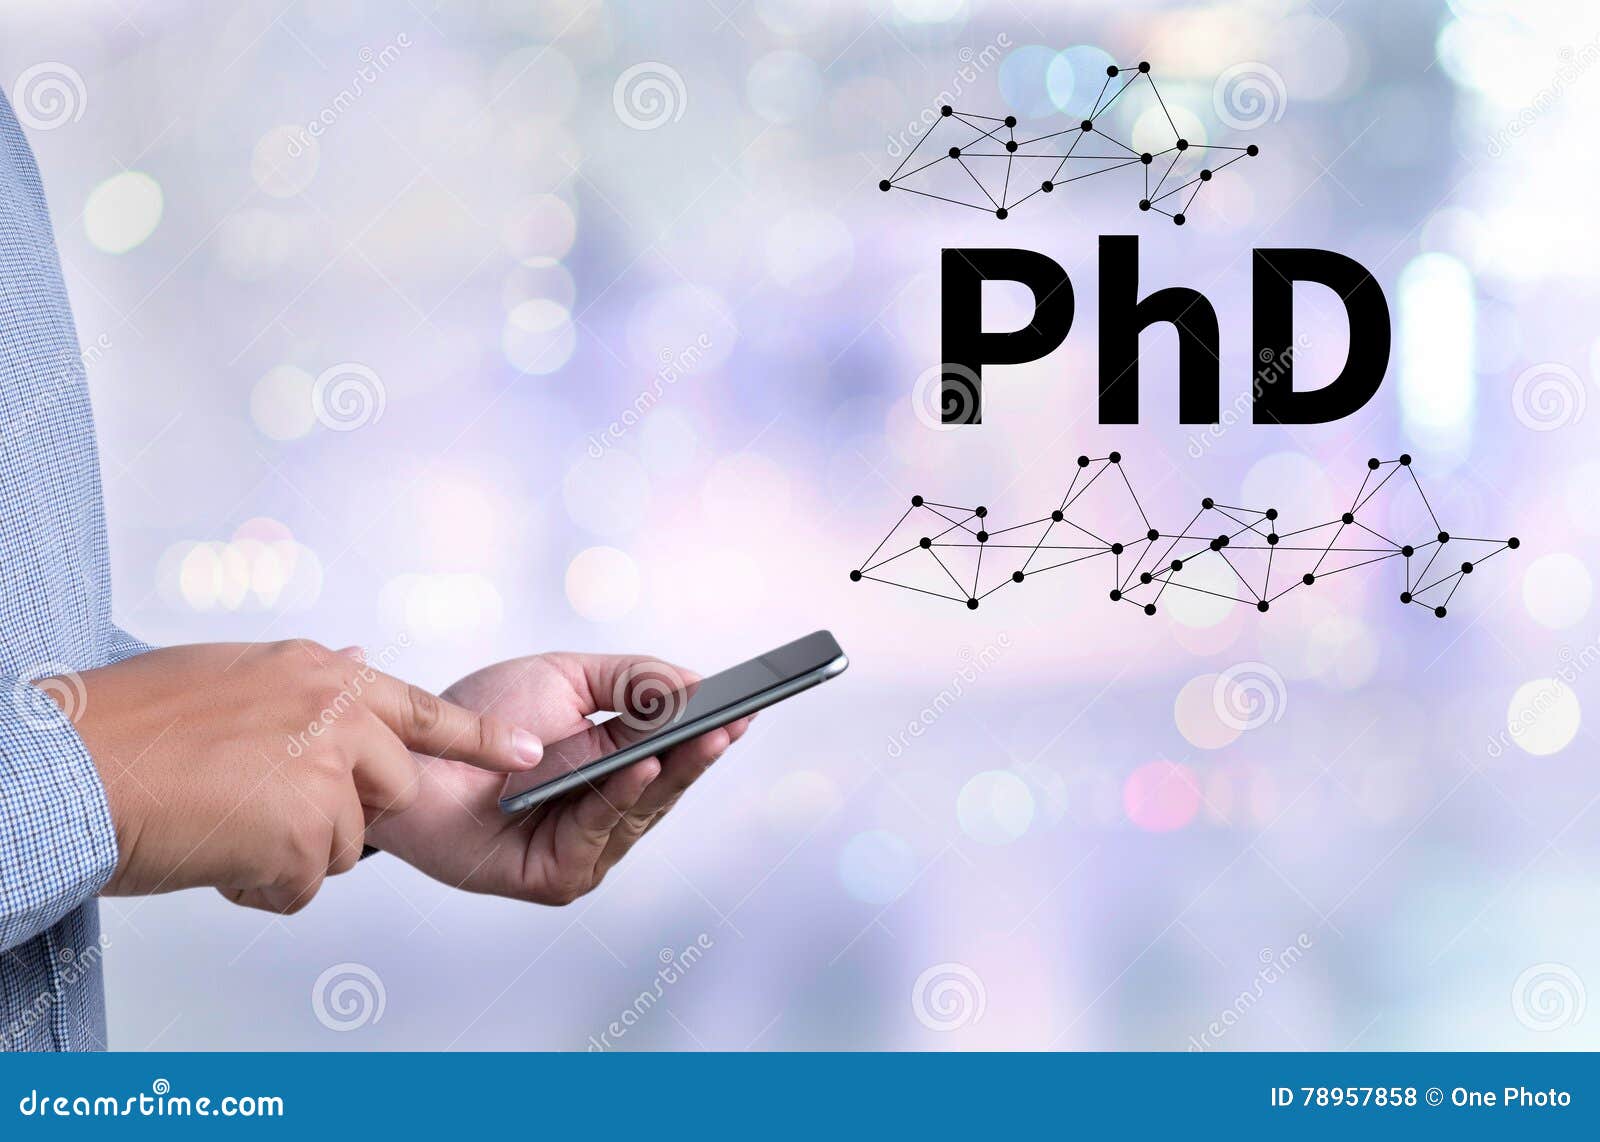 phd doctor pic